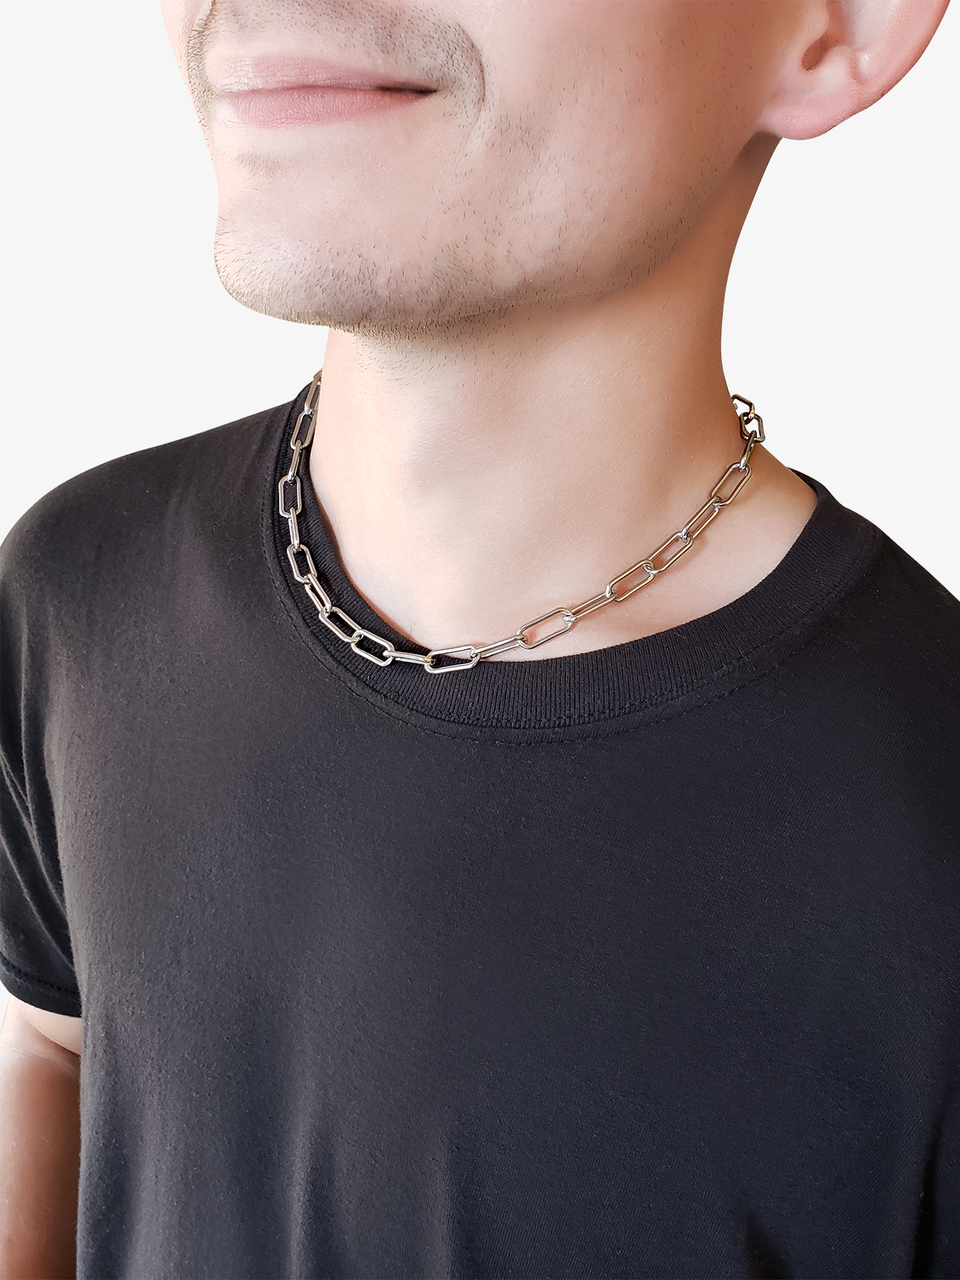 Men's Large Silver Gold Paperclip Necklace